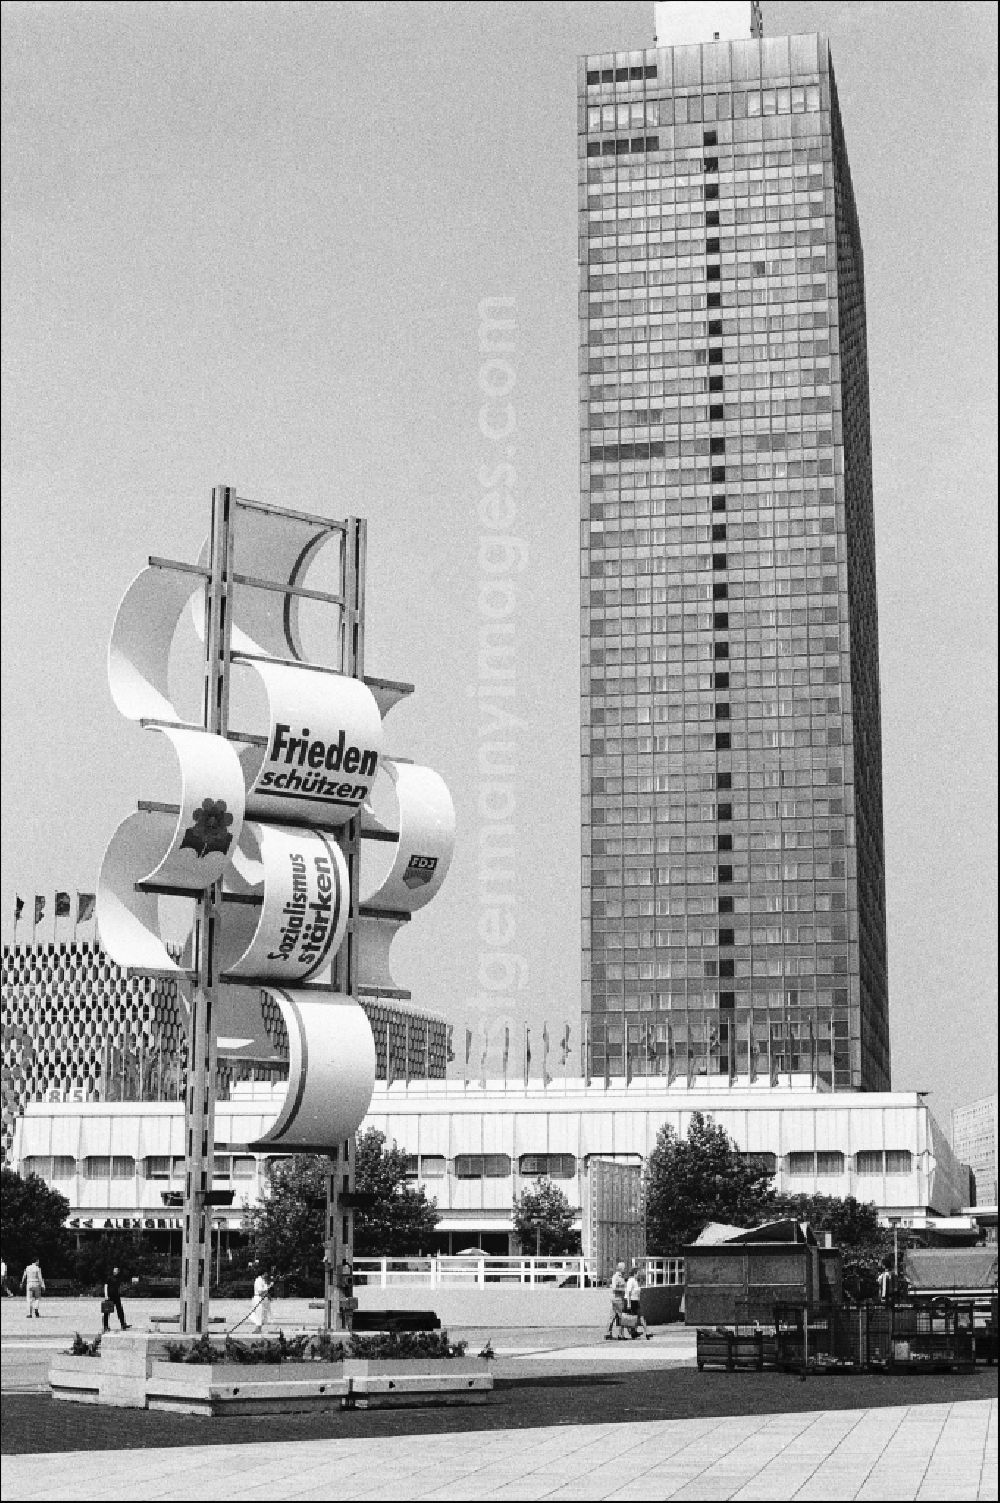 GDR image archive: Berlin - Festively decorated city on the occasion of the National Youth Festival in Berlin-Mitte on the territory of the former GDR, German Democratic Republic. A banner reads Frieden schuetzen Sozialismus staerken, and in the background is the Stadt Berlin hotel